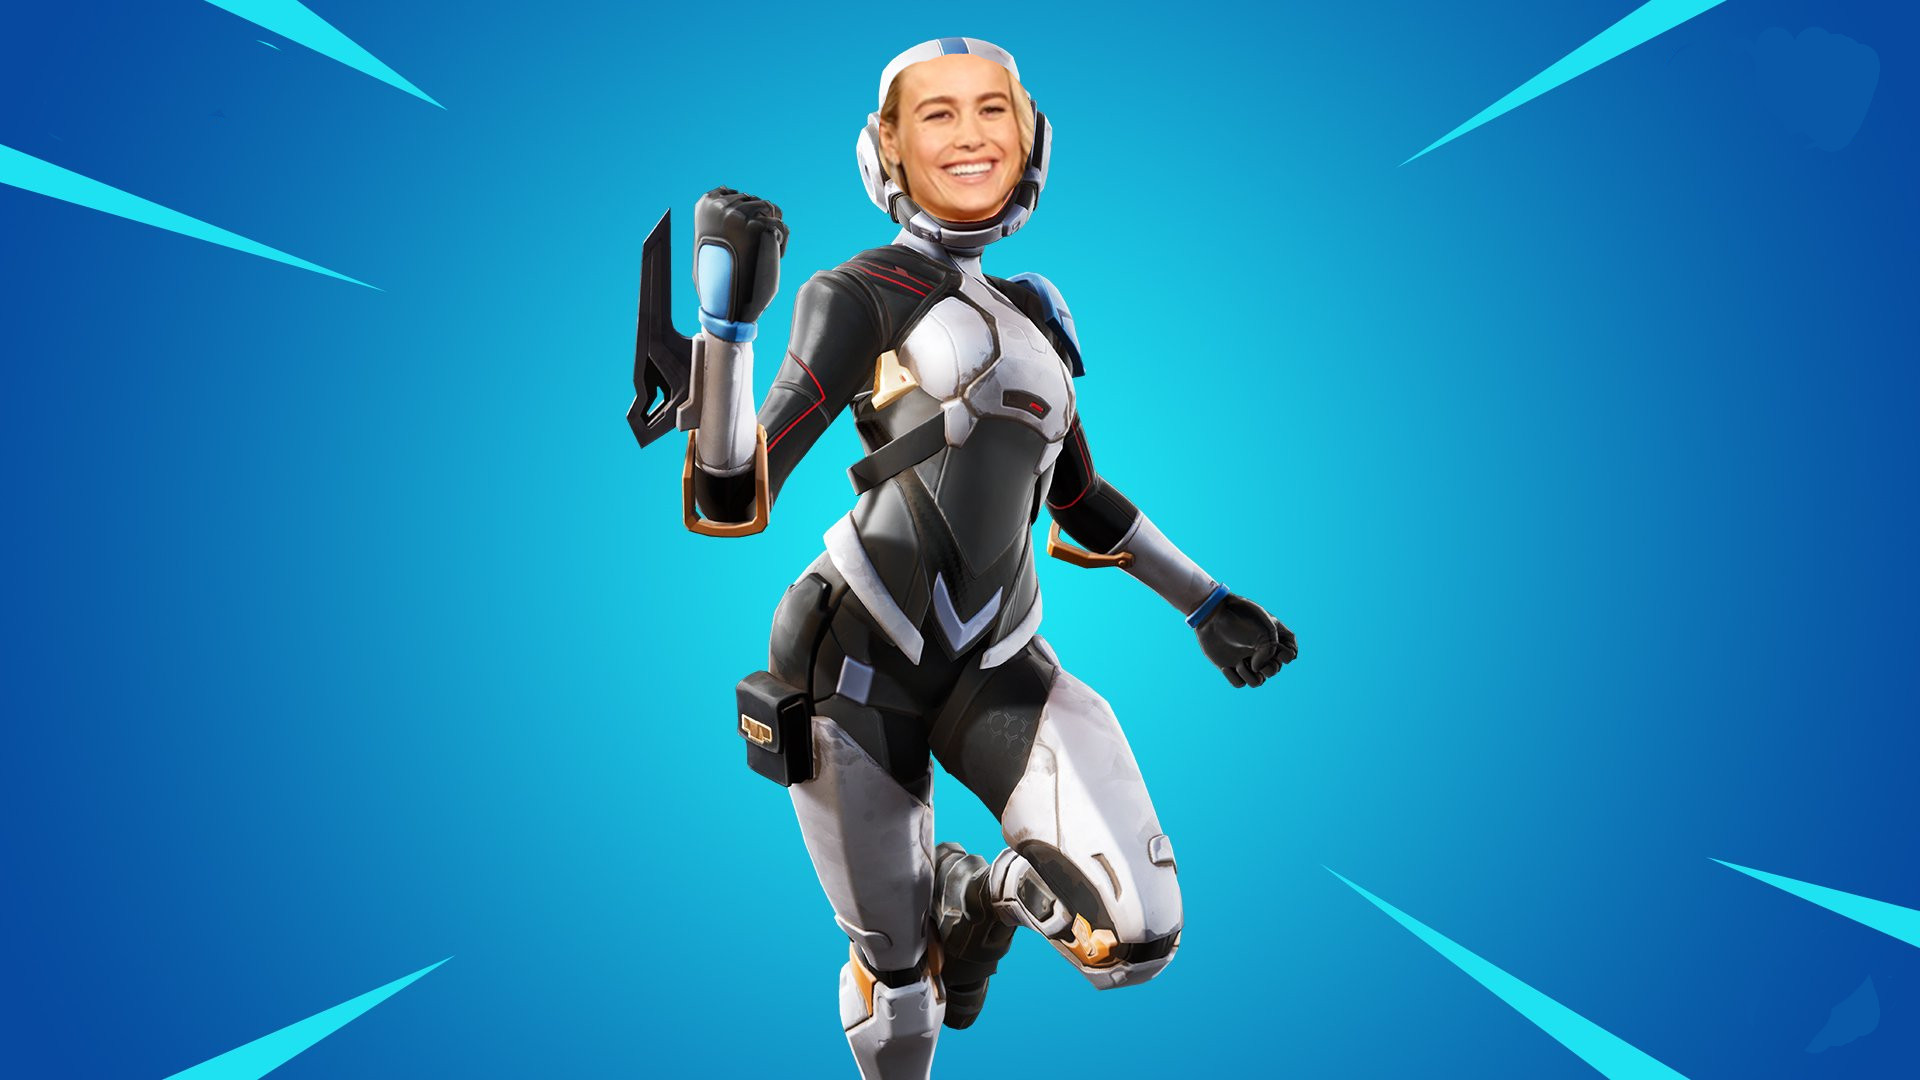 Fortnite Brie Larson character could be coming soon